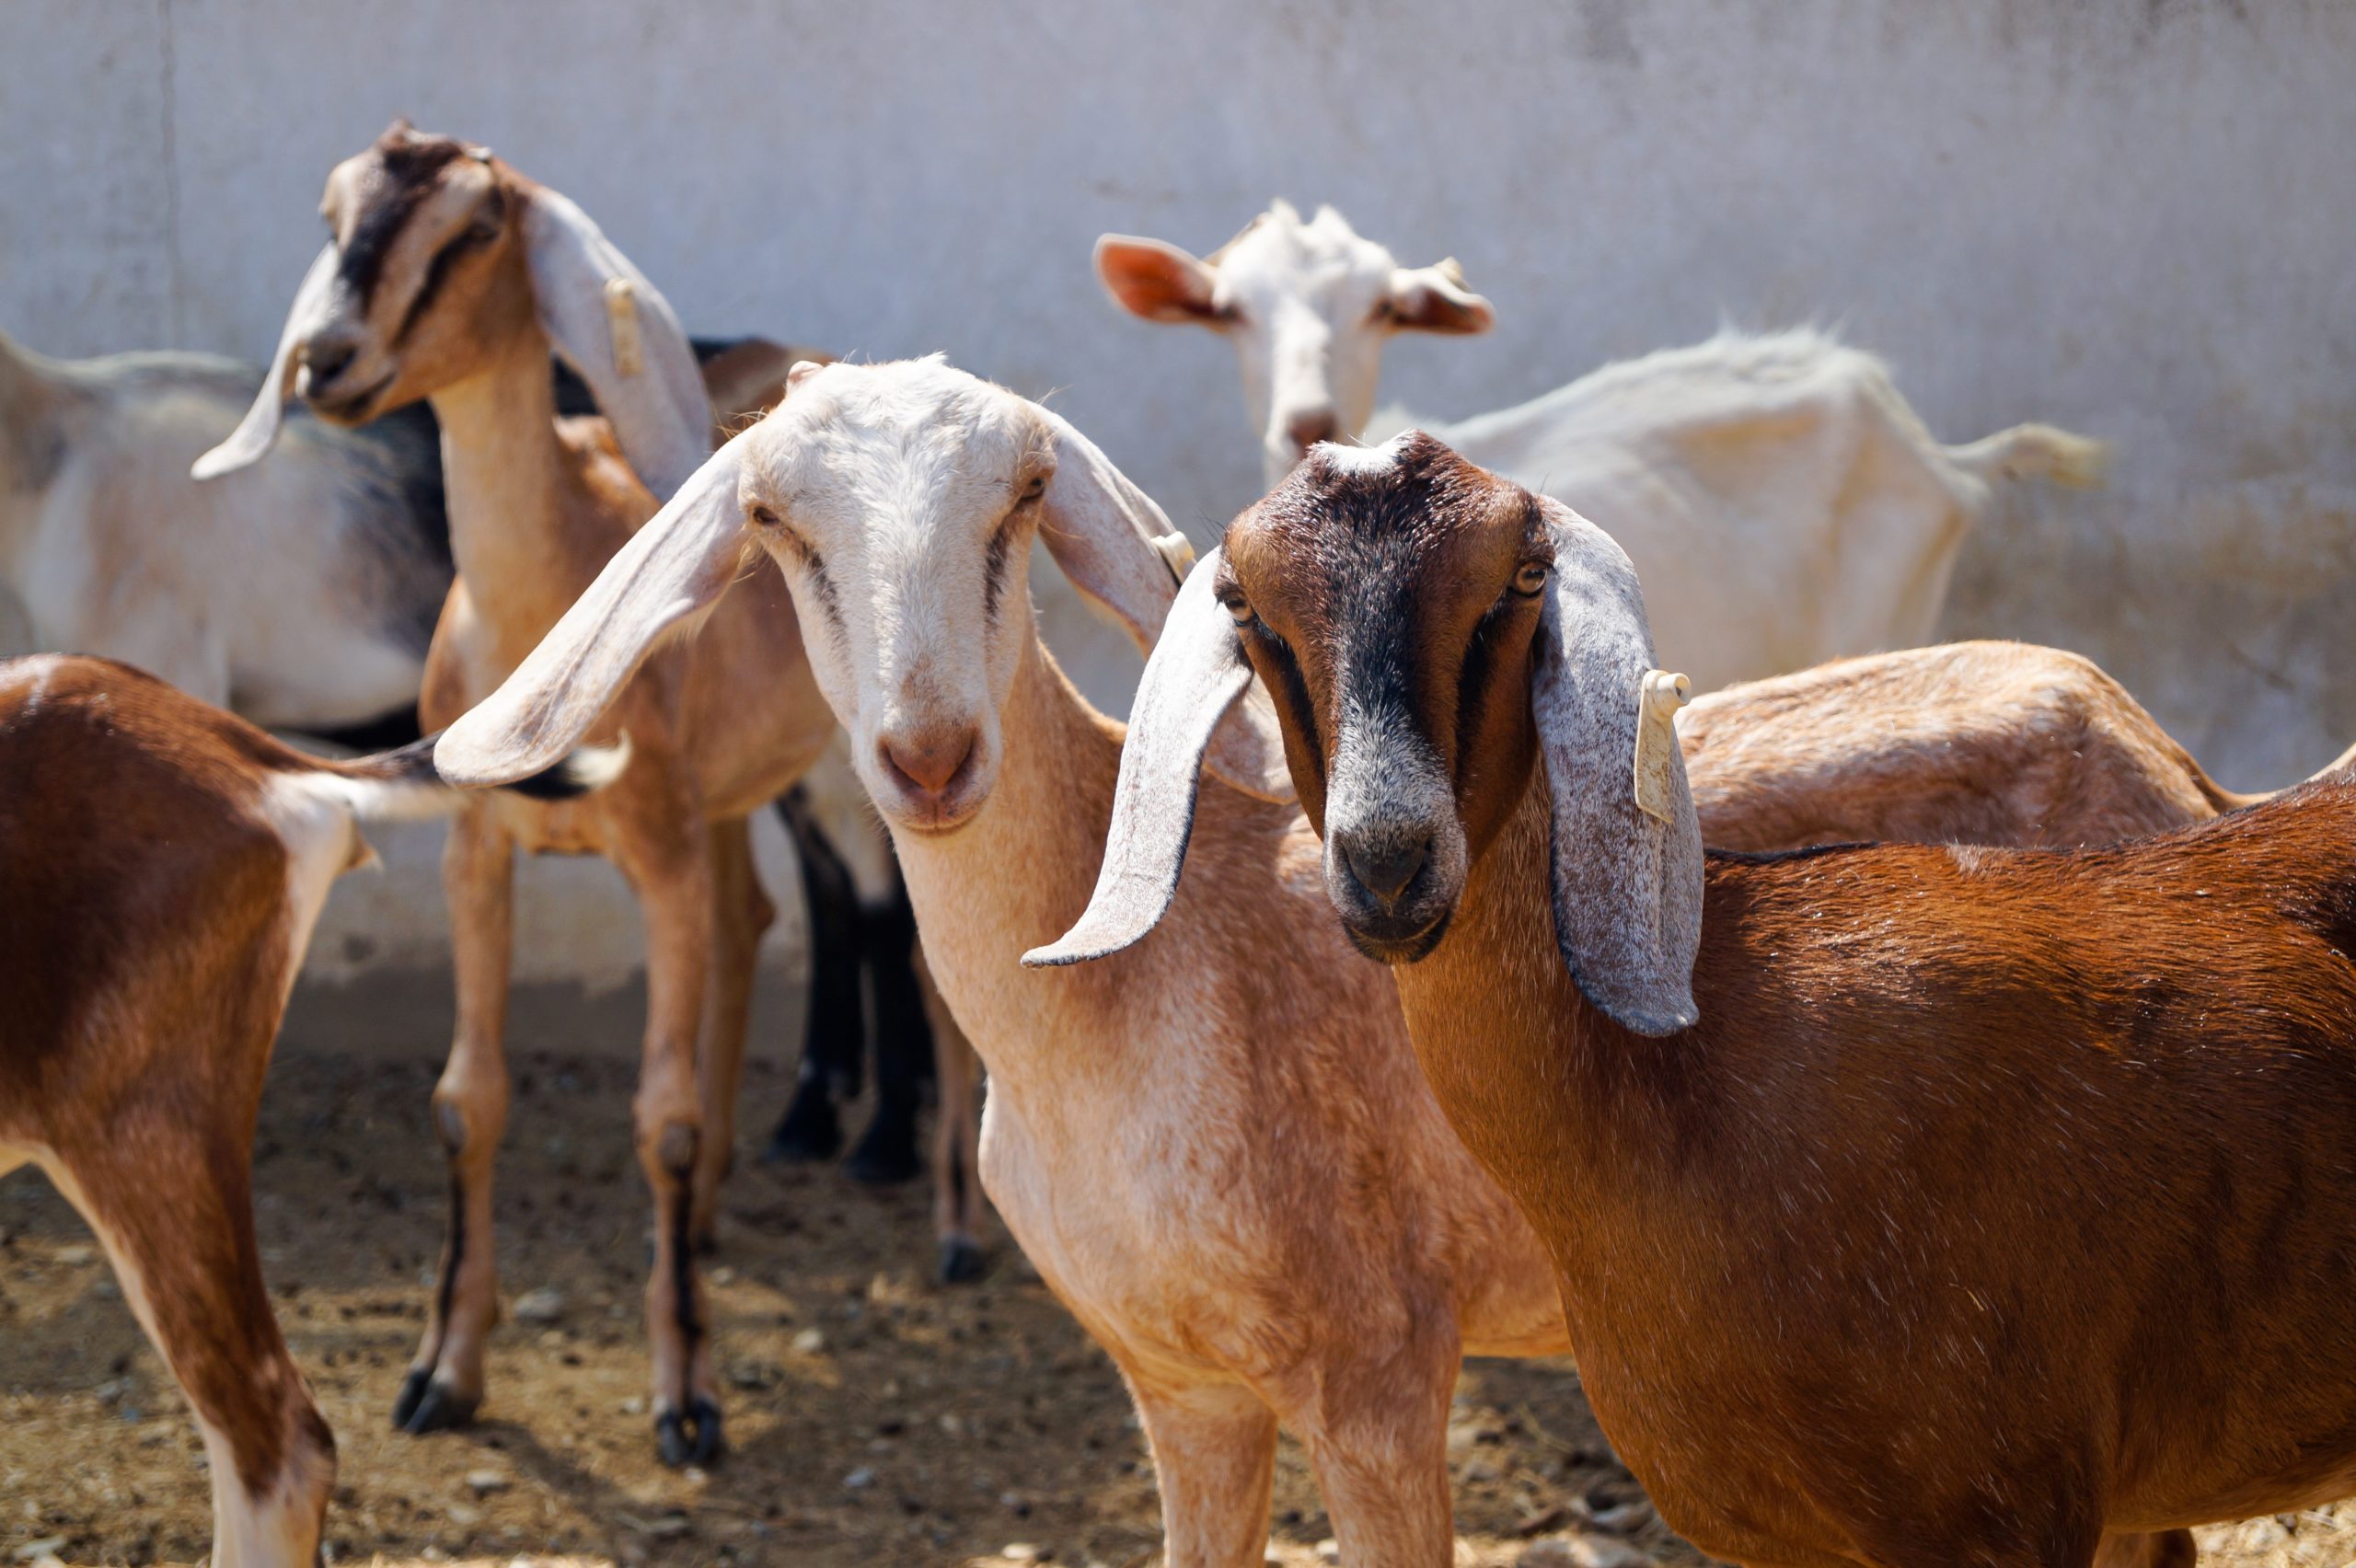 What goats mean for leprosy patients